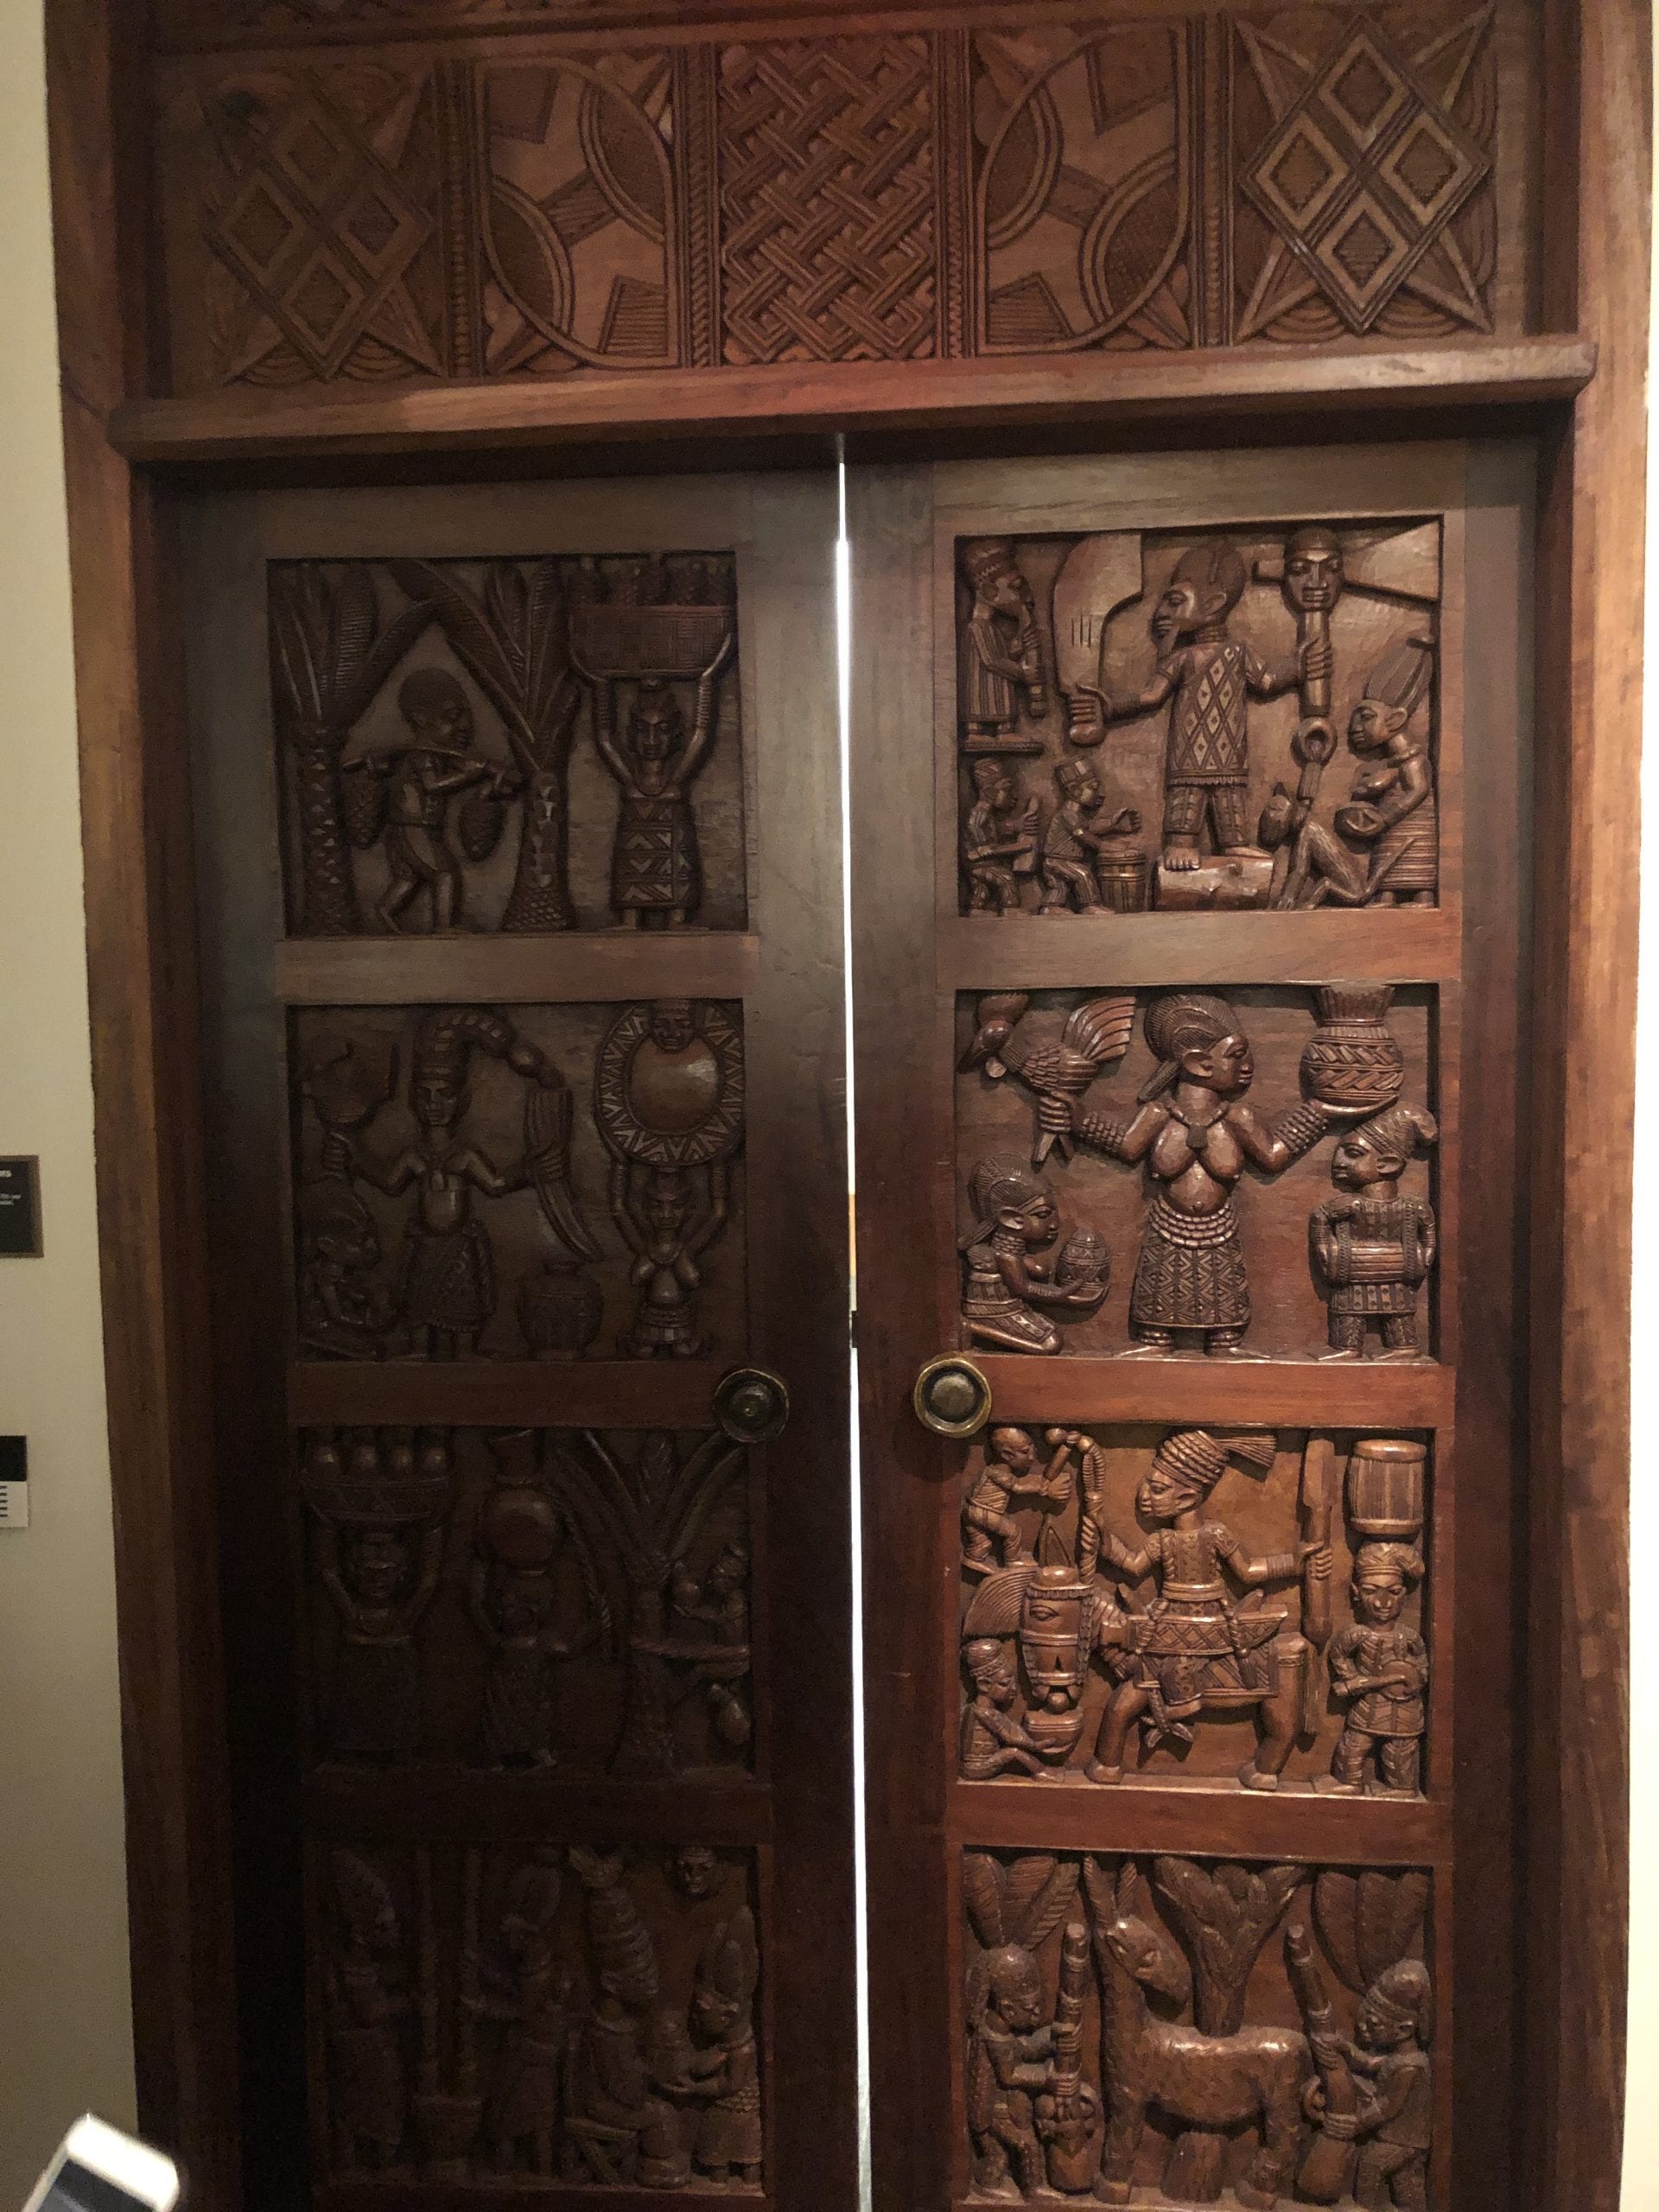 A wooden door with carved images of people working and playing instruments